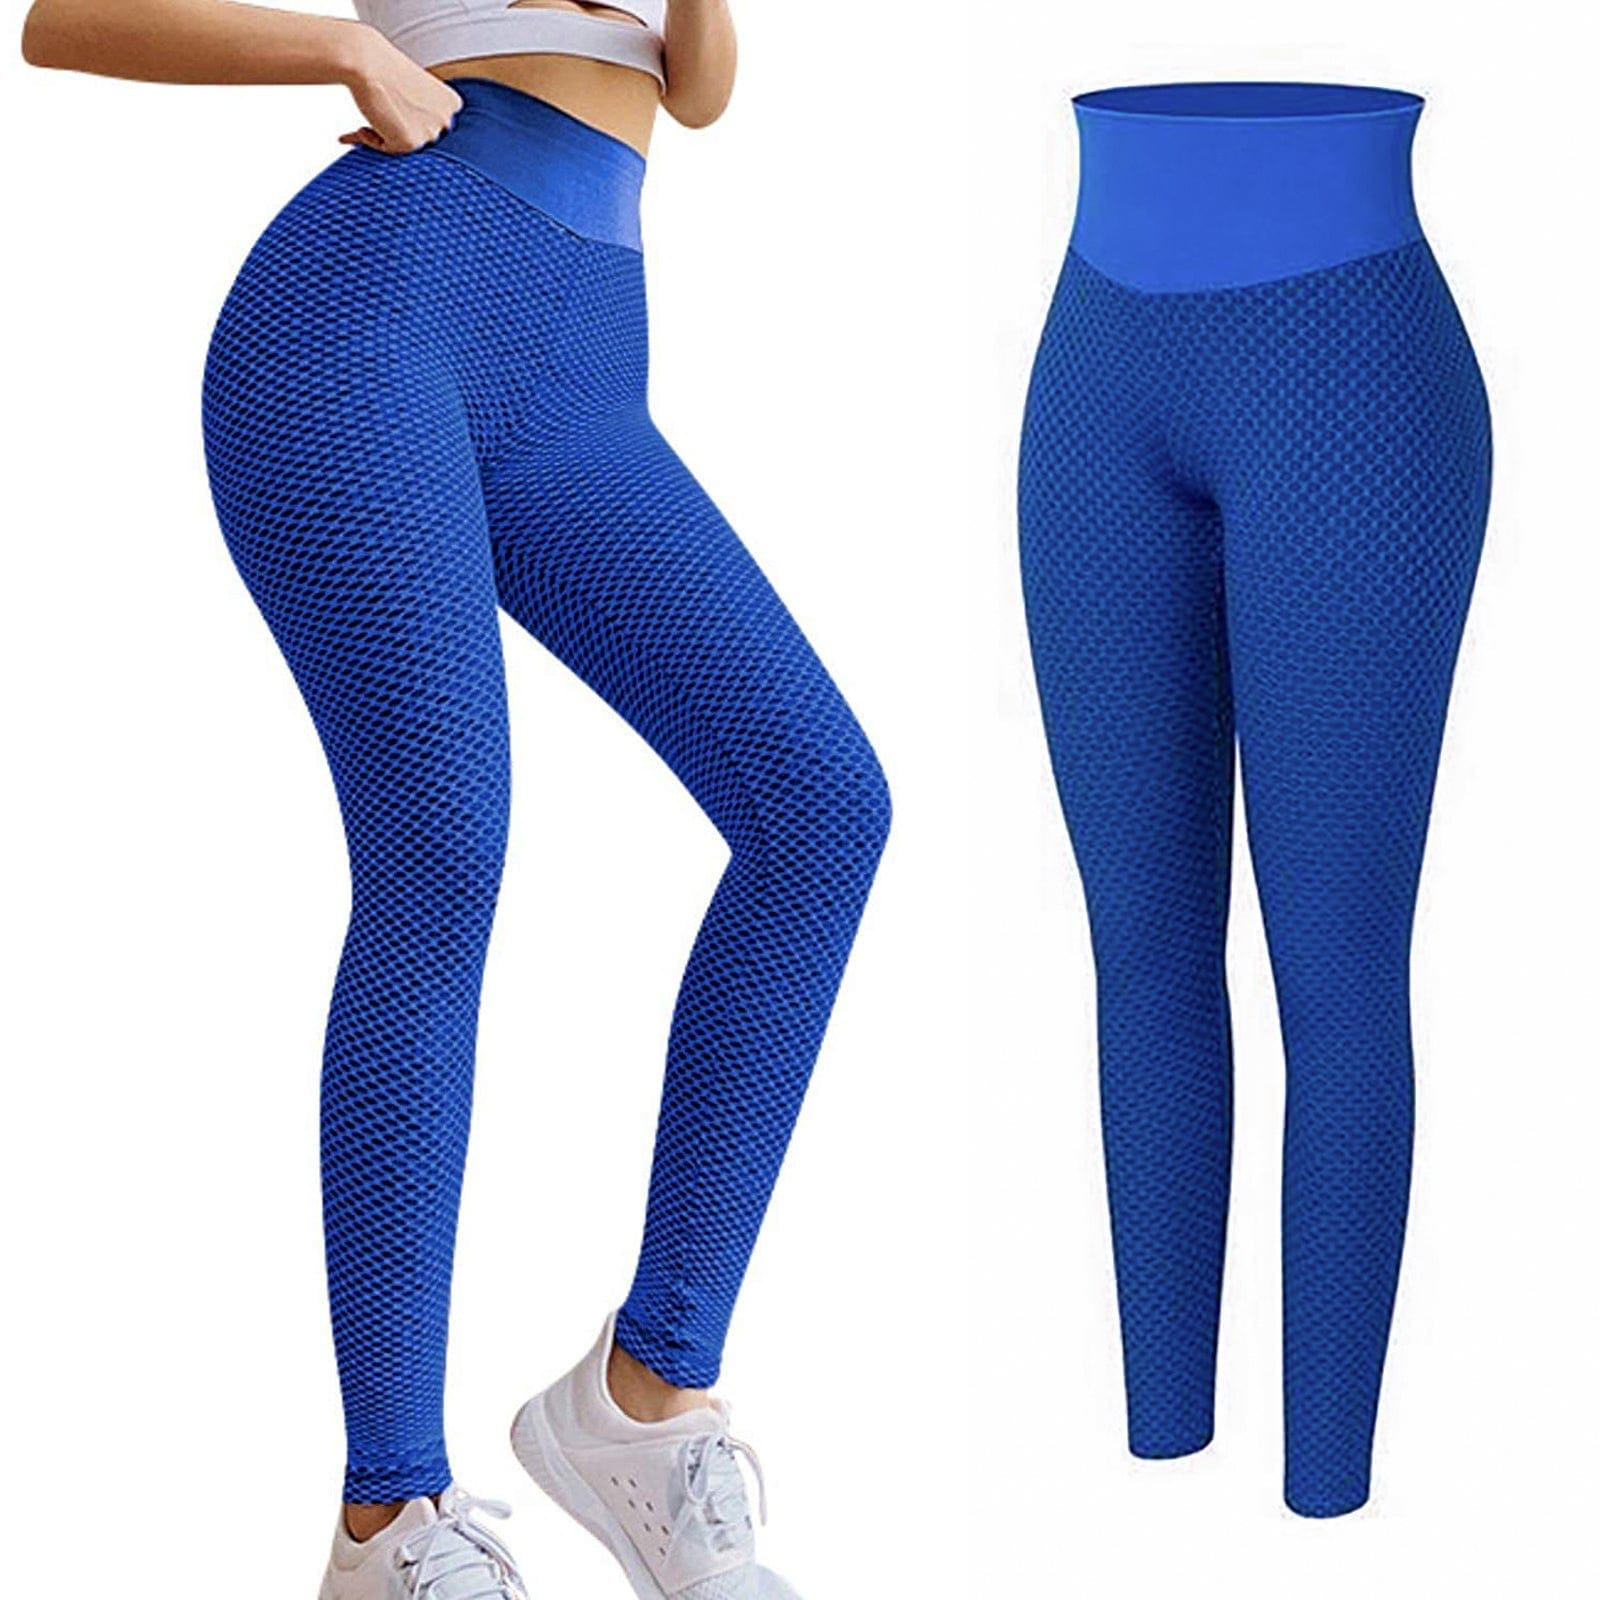 ZIZOCWA Tall Leggings Plus Size Workout Tights for Women 3X Womens Jeans  Bottom Pants Coloured Yoga Pants Highly Elastic Slim Nine Minute Pants  Thick